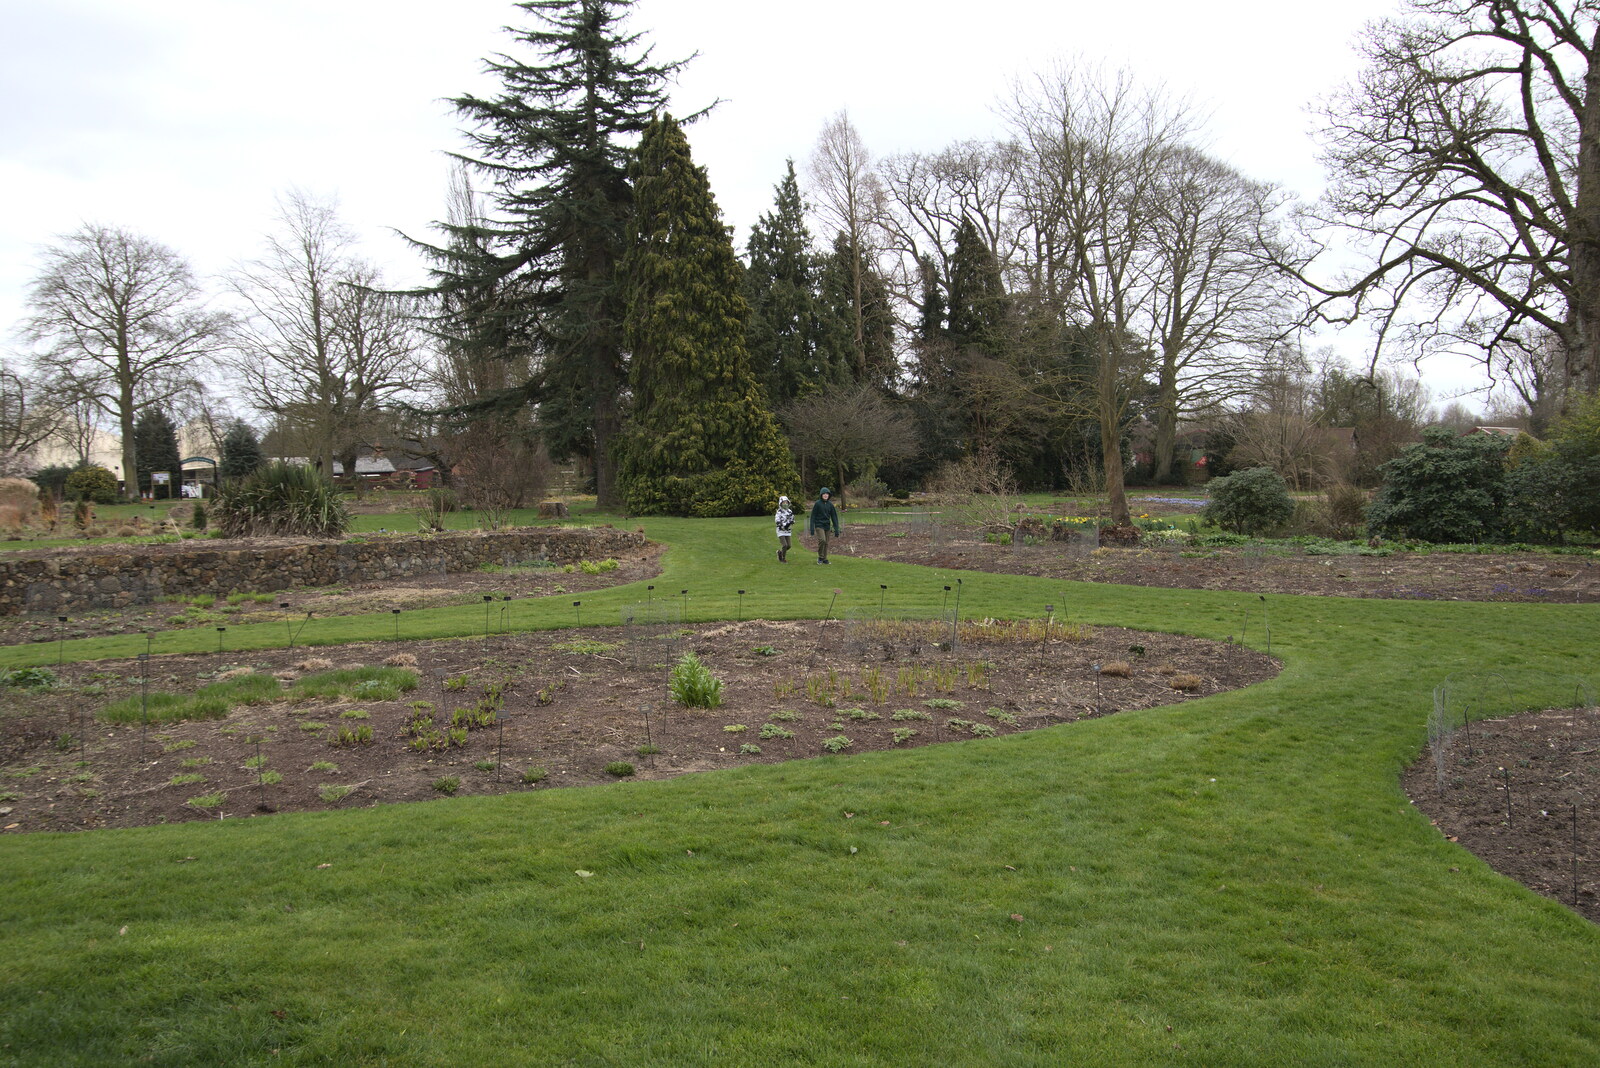 The boys in the garden from A Return to Bressingham Steam and Gardens, Bressingham, Norfolk - 28th March 2021